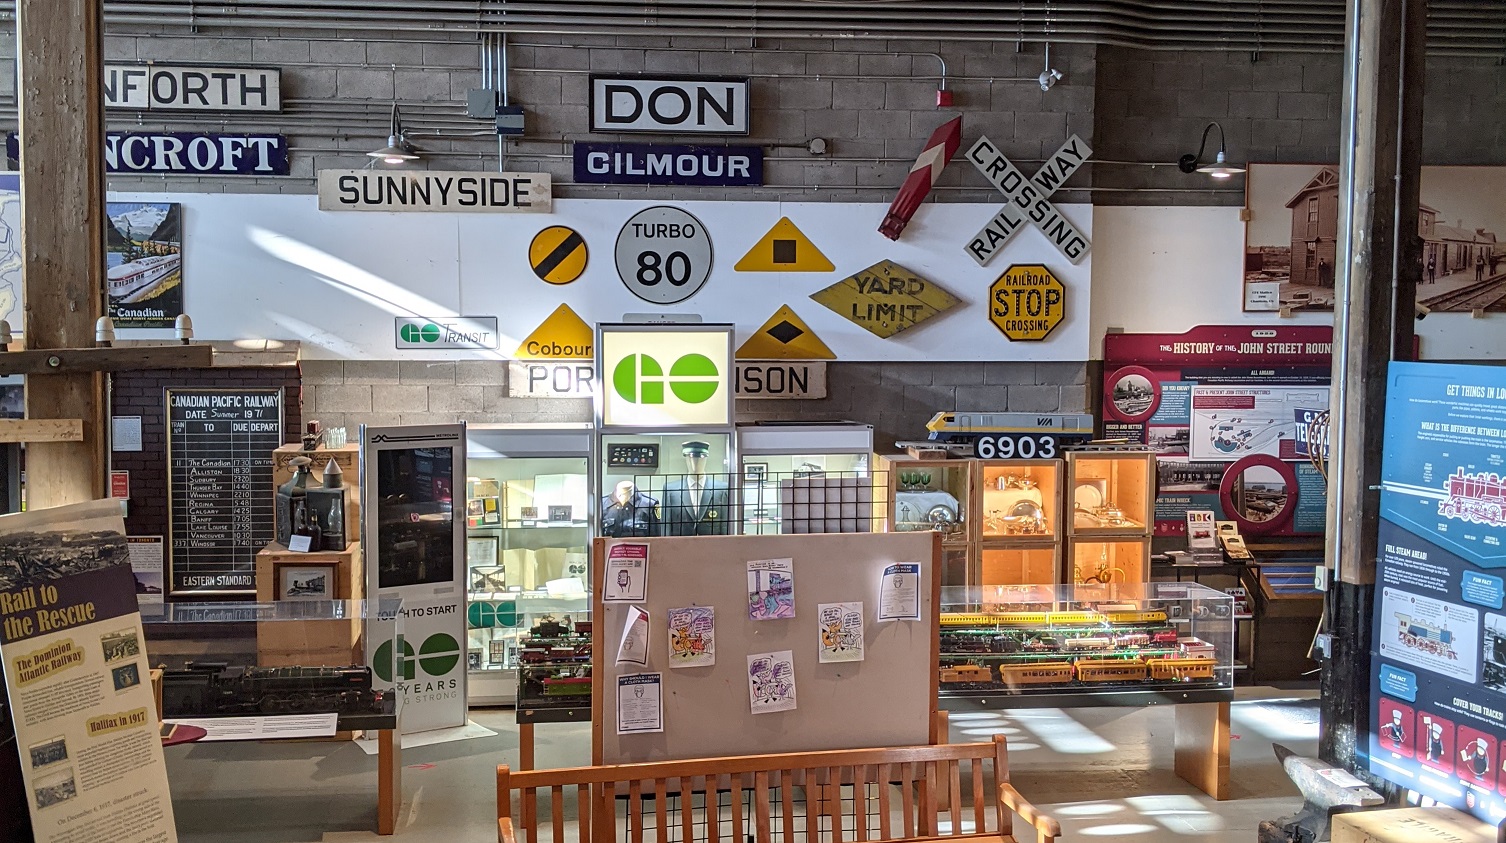 Celebrate International Museum Day with the Toronto Railway Museum! Image shows busy interior of the museum with many railway signs, exhibits and drawings.